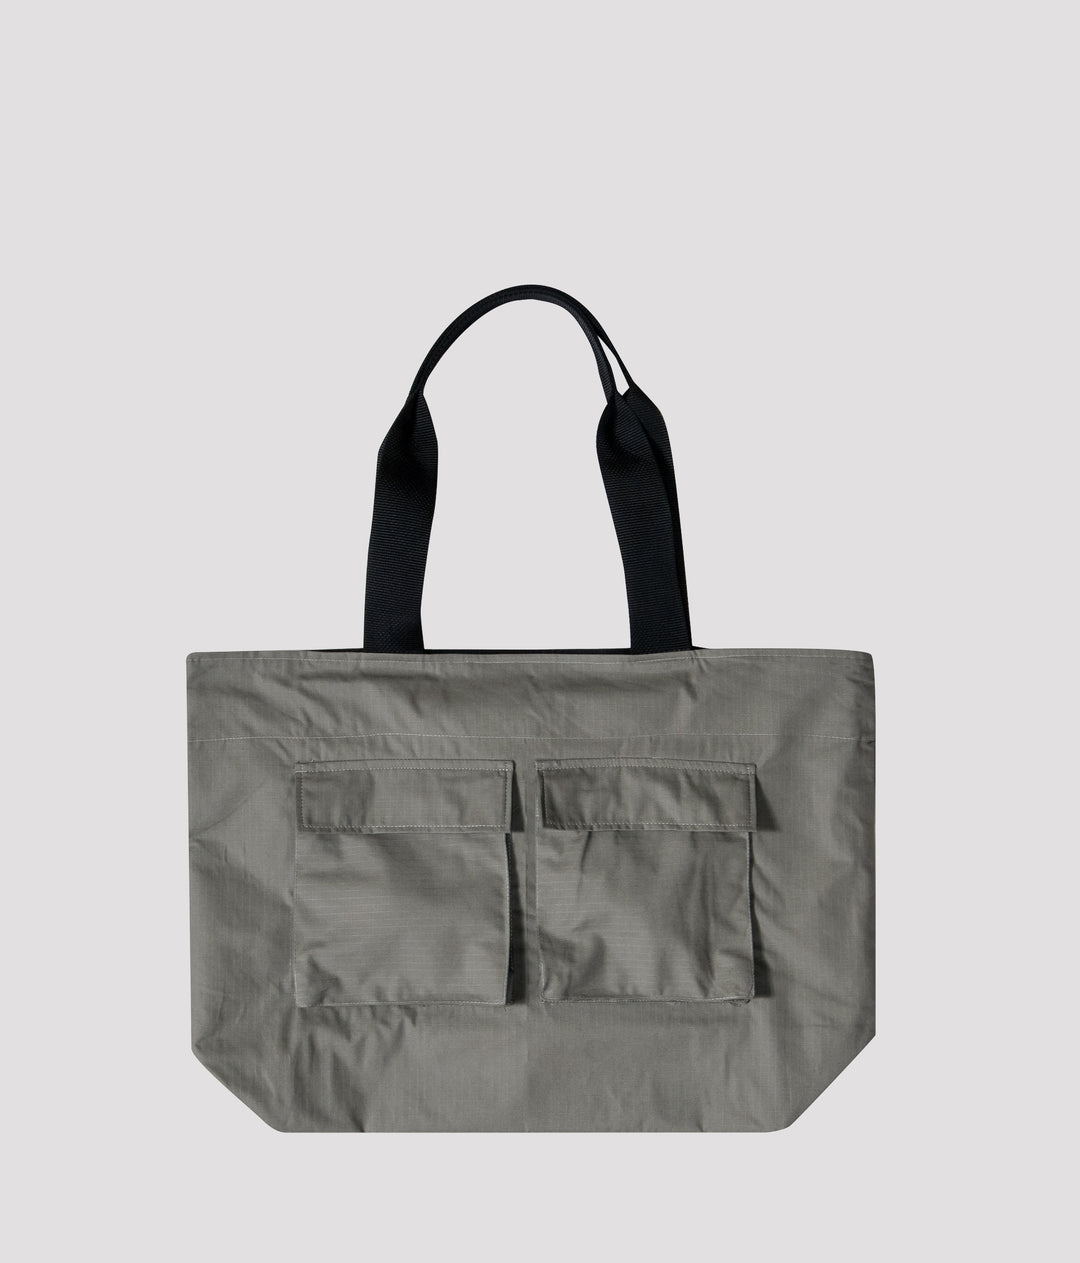 LARGE tote